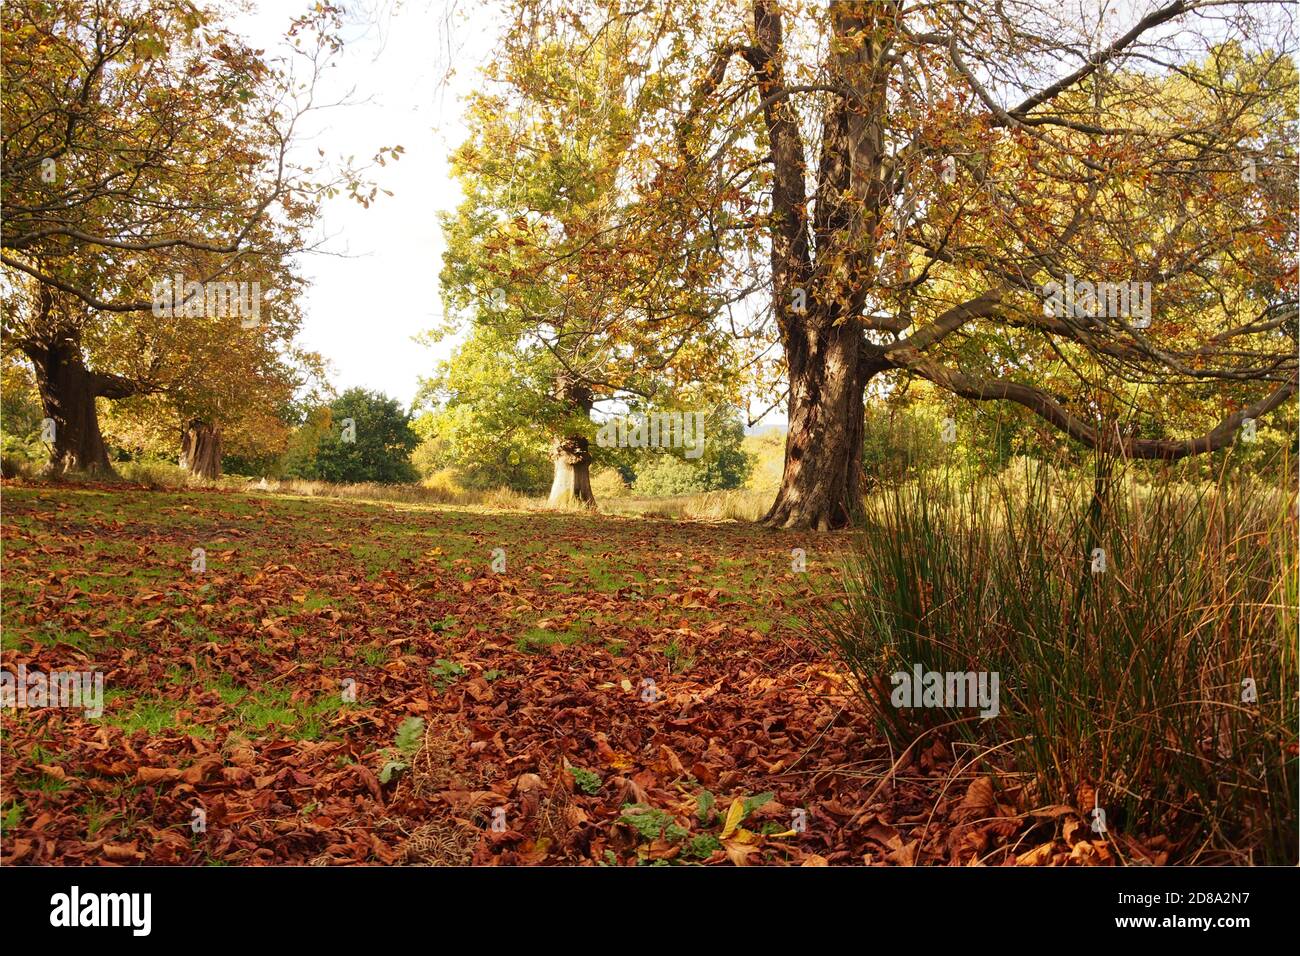 Looking through a group of mature oak trees in the autumn with fallen leaves covering the grass in the forground Stock Photo